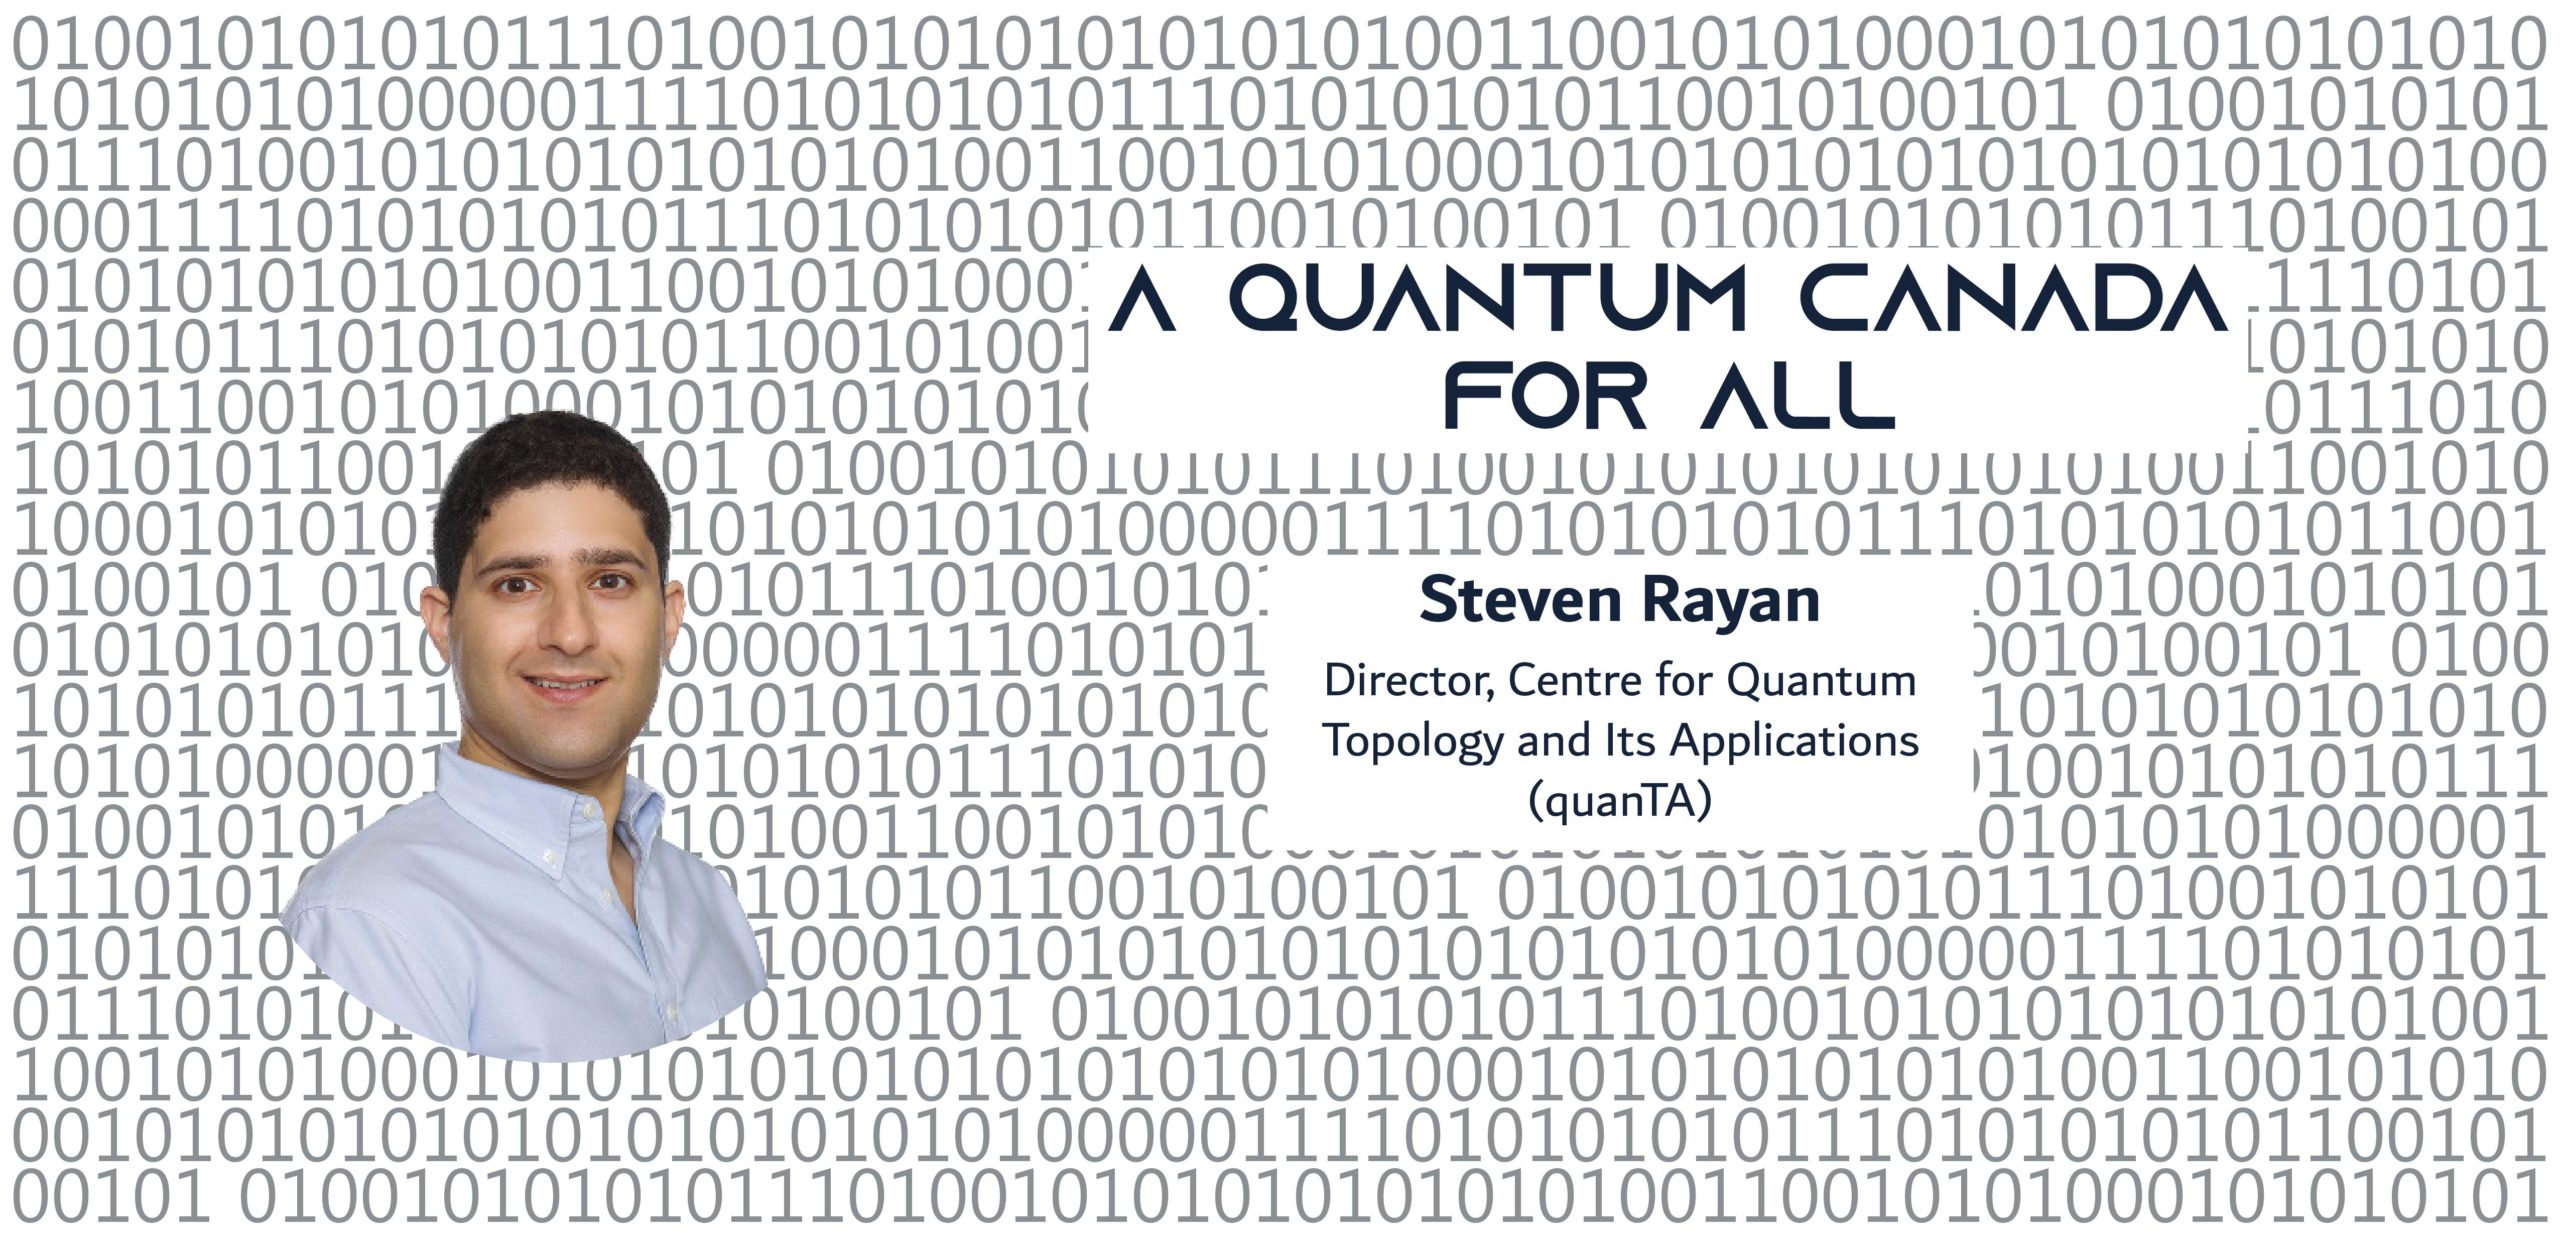 A photo of a man on a background of binary, with the text: A Quantum Canada For All Steven Rayan Director, Centre for Quantum Topology and Its Applications (quanTA) Associate Professor, Mathematics & Statistics, University of Saskatchewan